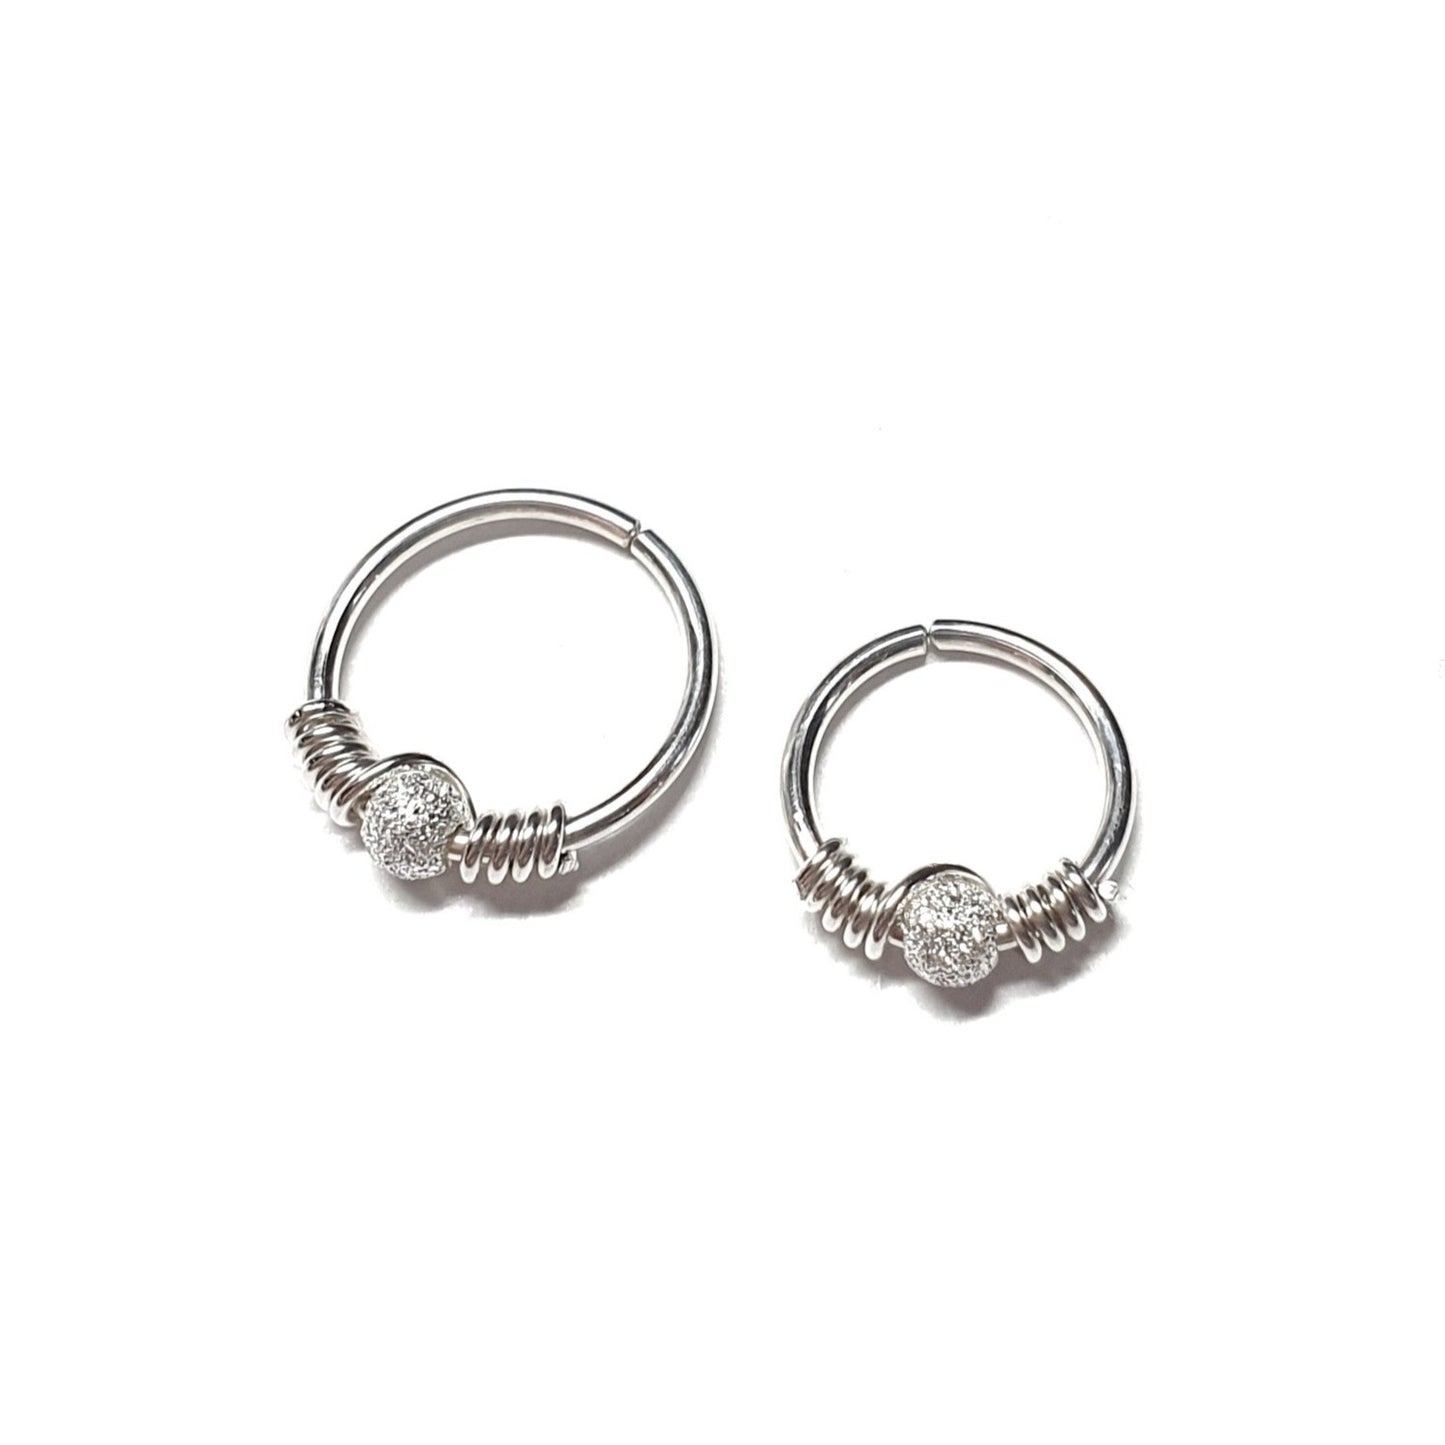 Sterling Silver 925 Cartilage Seamless Hoop Earring Nose Ring with Sparkly Bead. 18g 20g 8mm or 10mm